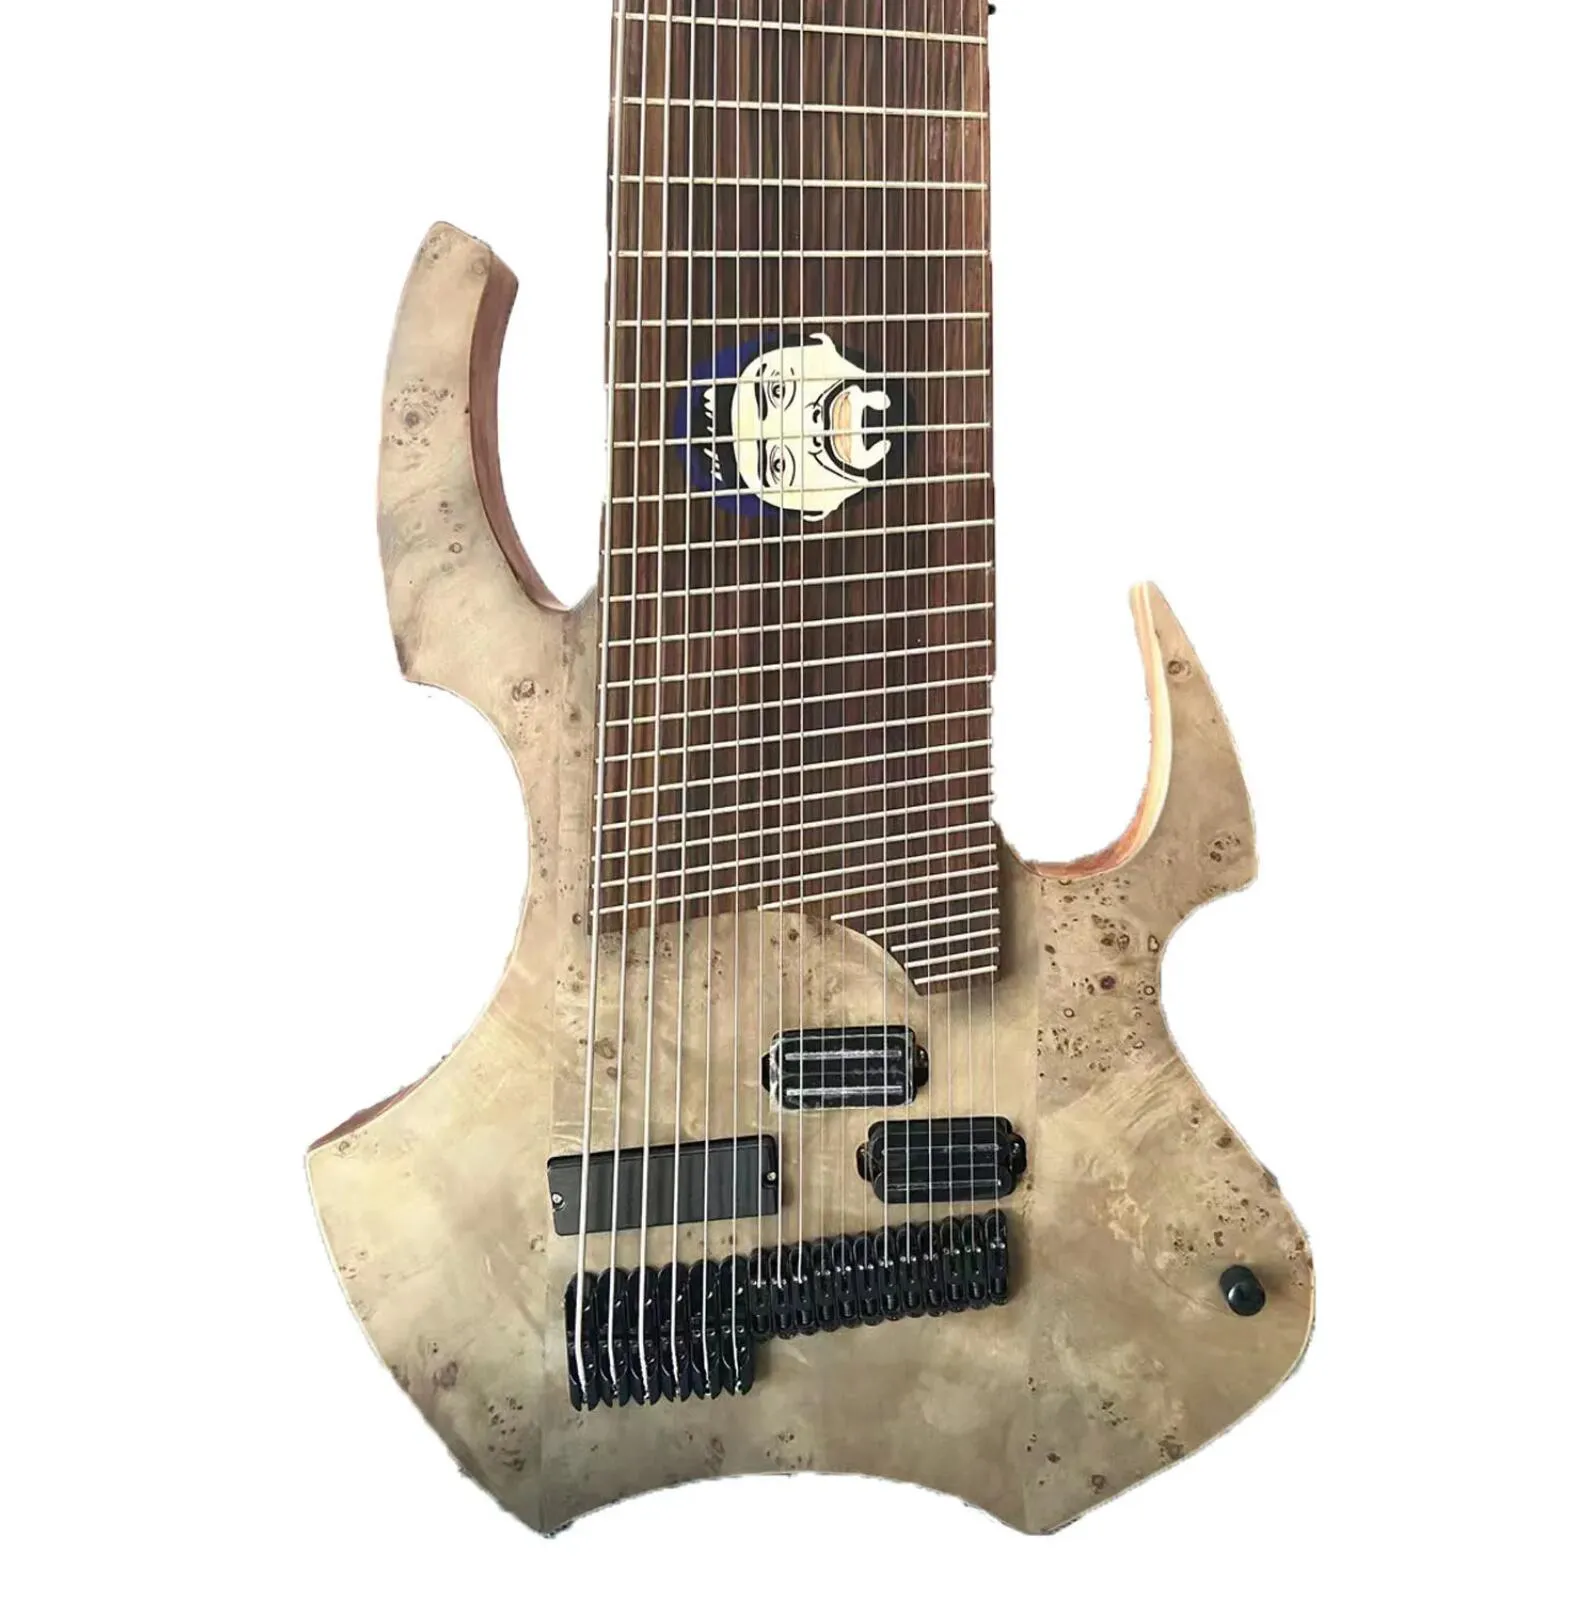 Orms Djent Jared Dines 18 cordas monstruosidade Spalted Maple Top Satin Gray Electric Bass Guitar Mogno xiloPhone Corpo Rosewood Fingerboard 6 +12 Hardware preto